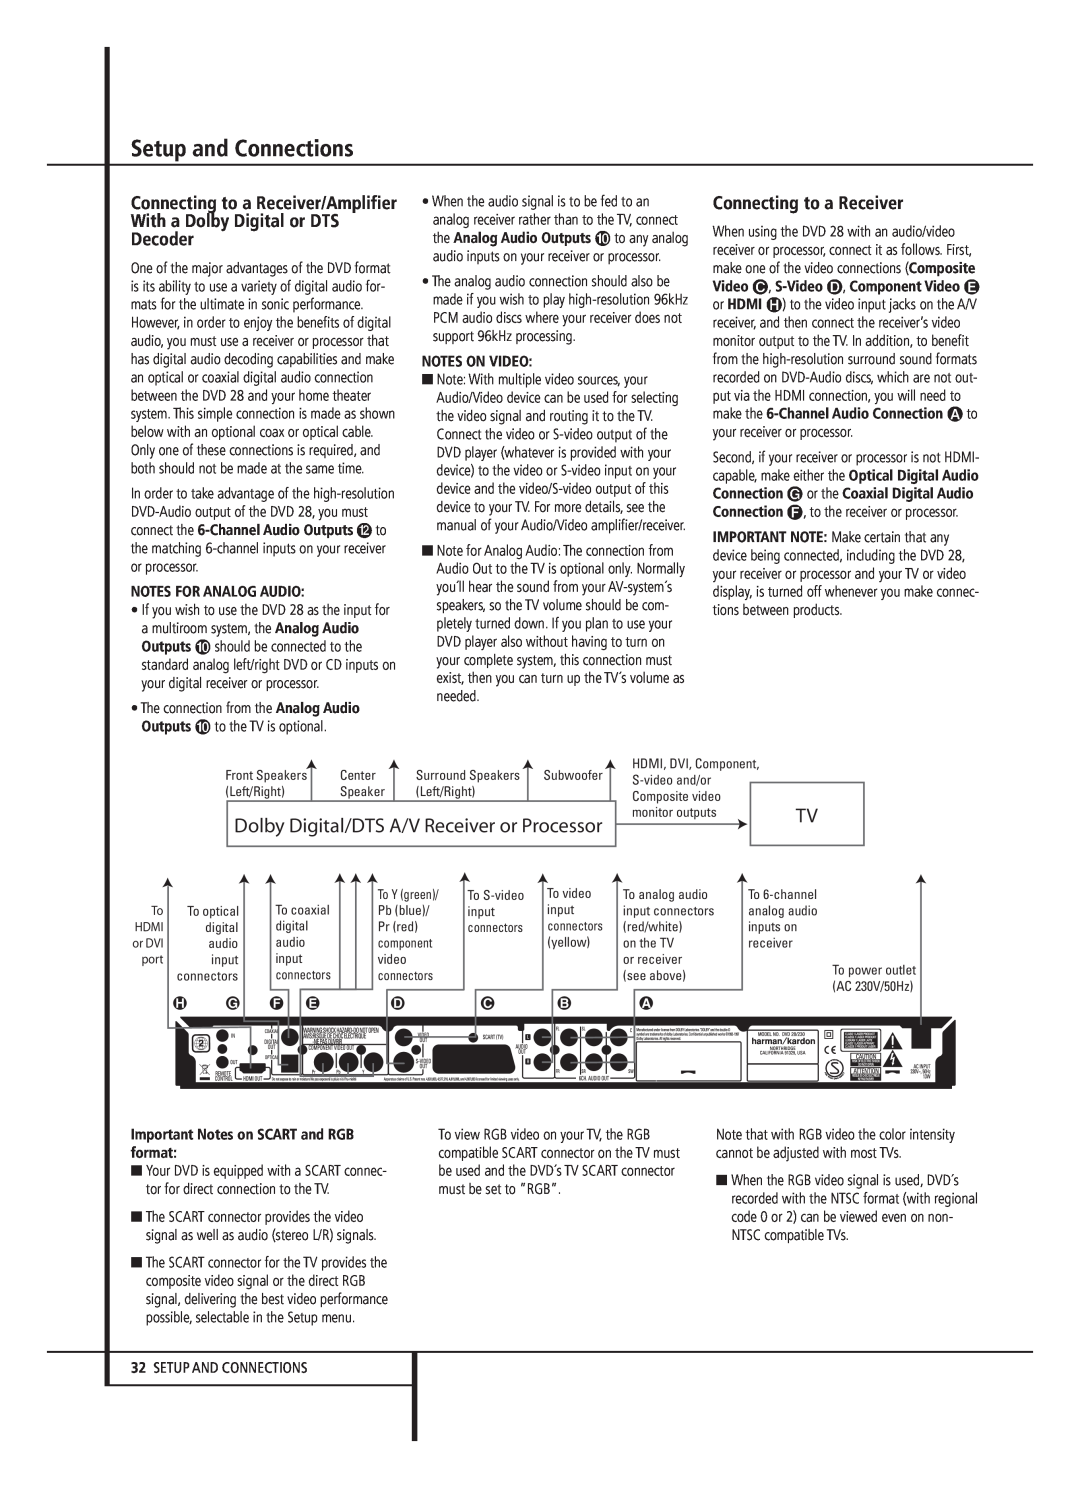 Harman-Kardon 13828 owner manual Connecting to a Receiver, Notes For Analog Audio, the Analog Audio Outputs to any analog 